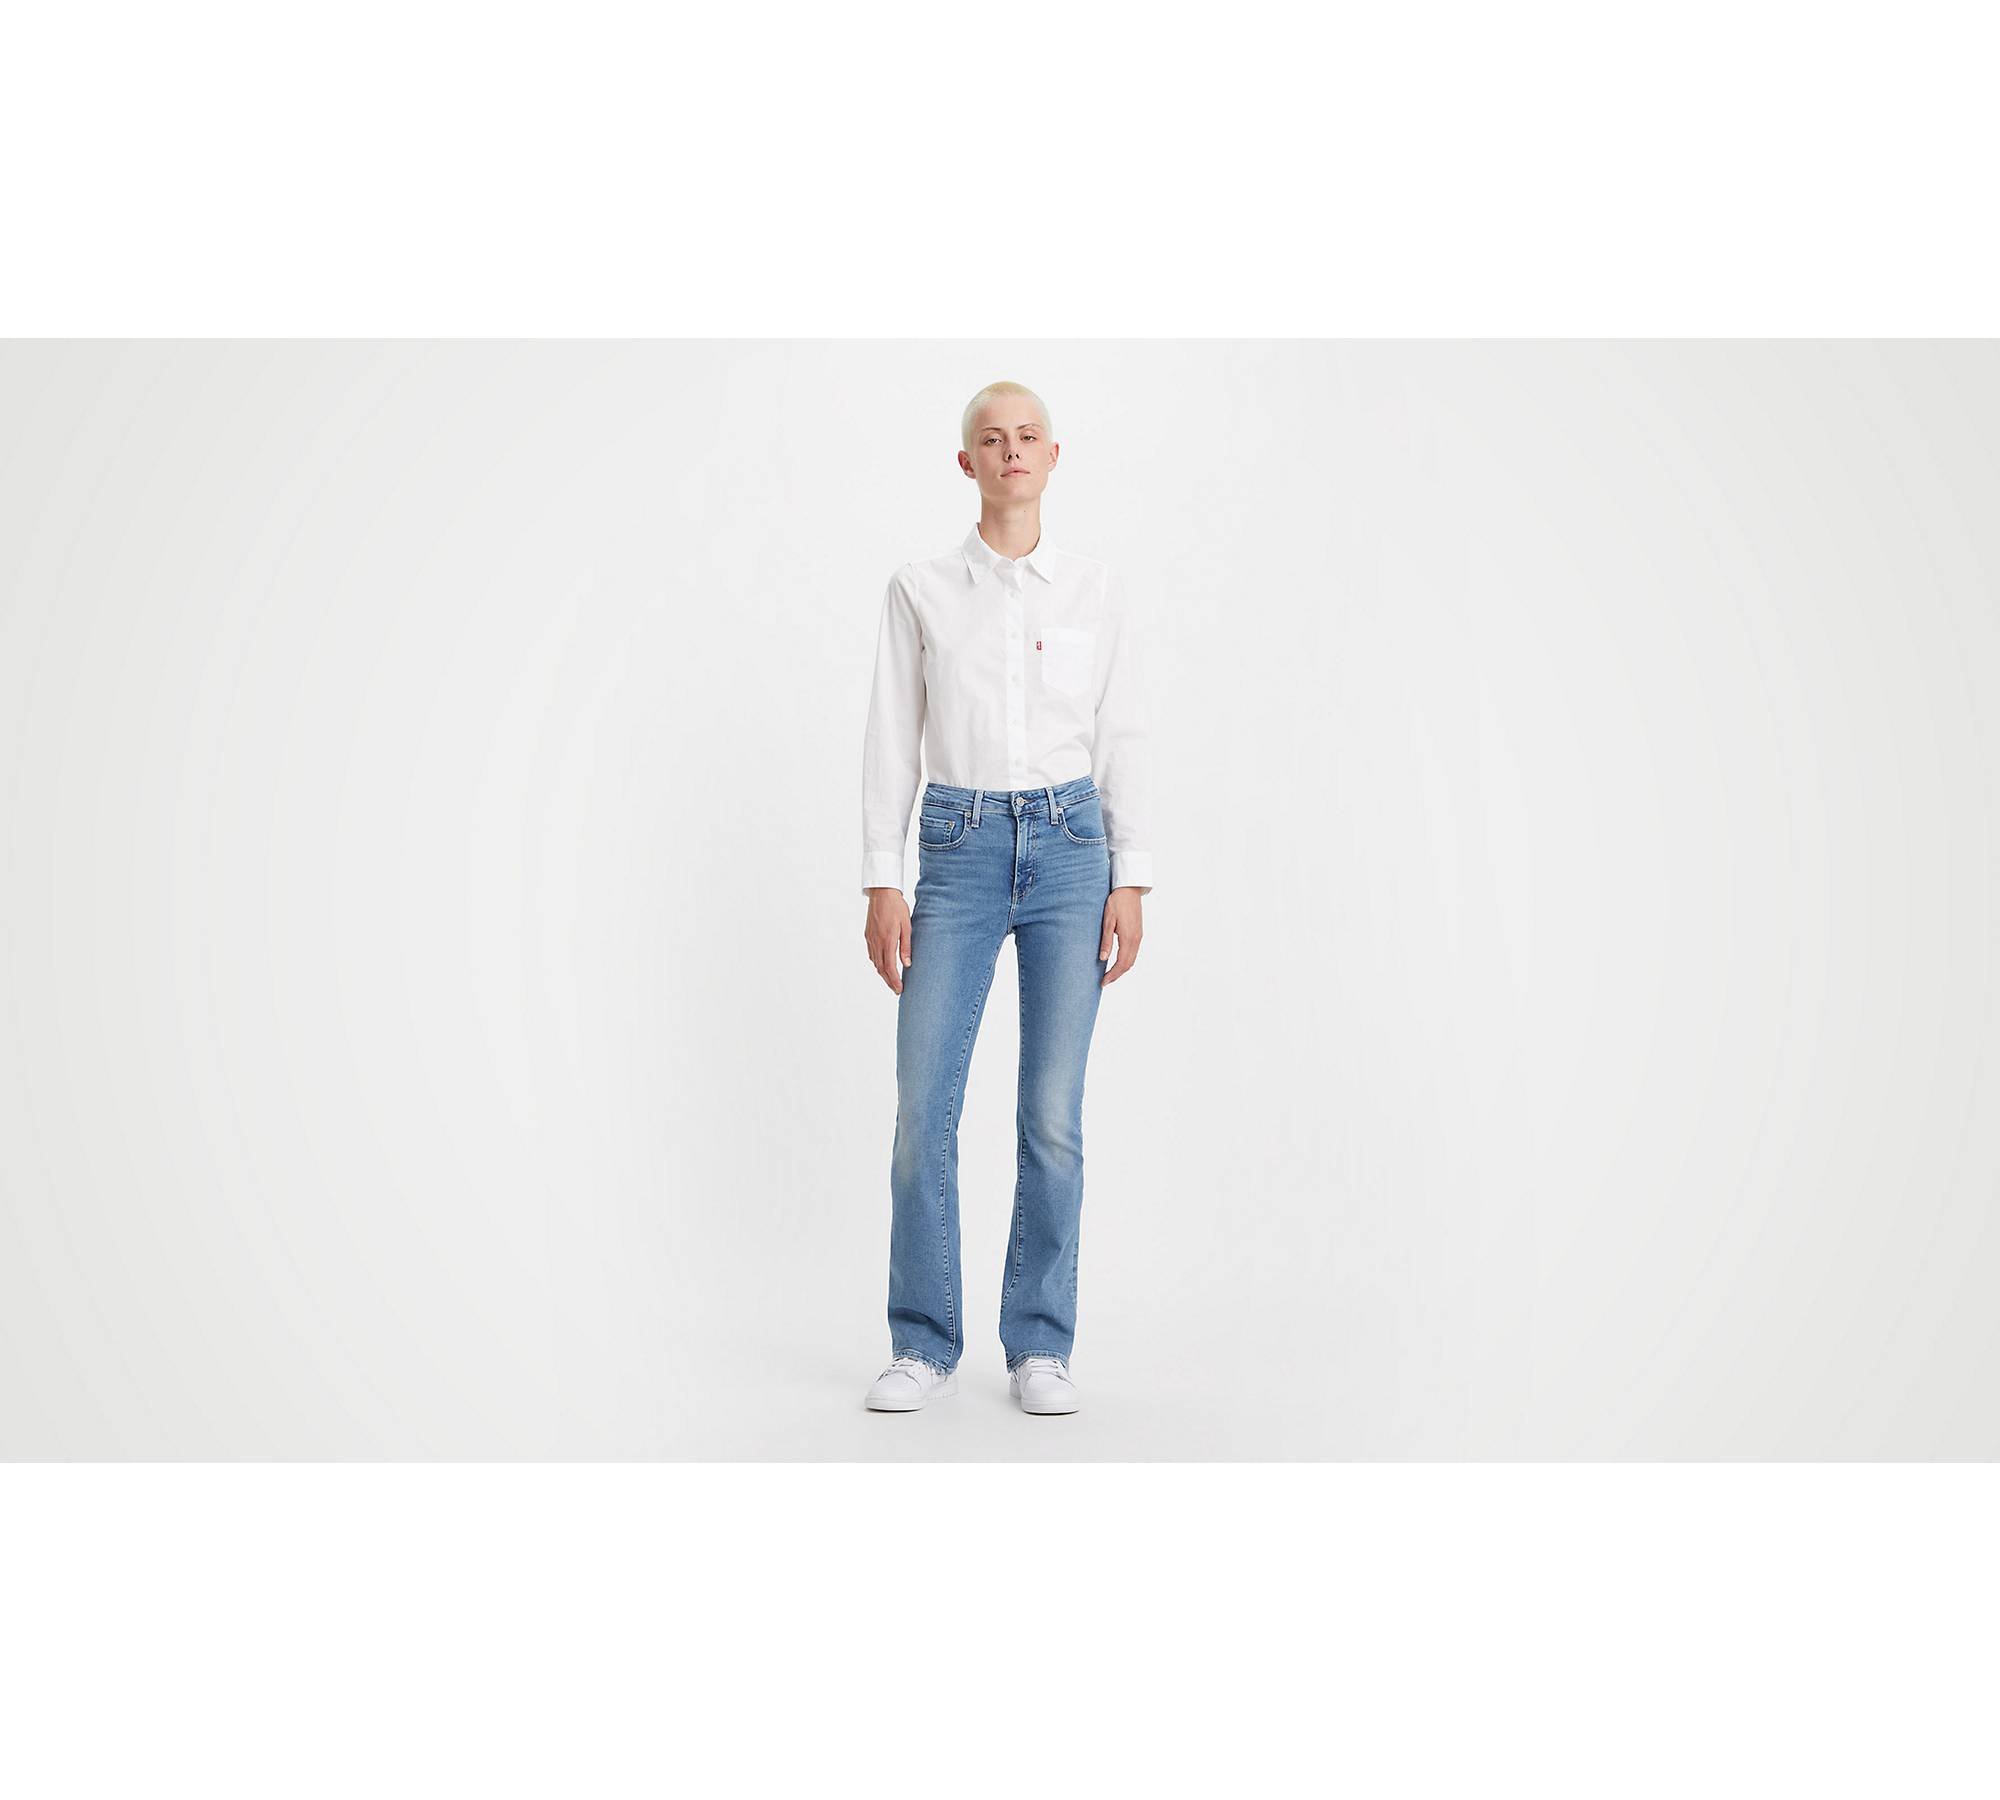 Levi's® 725™ HIGH RISE BOOTCUT - Bootcut jeans - rio rave/light